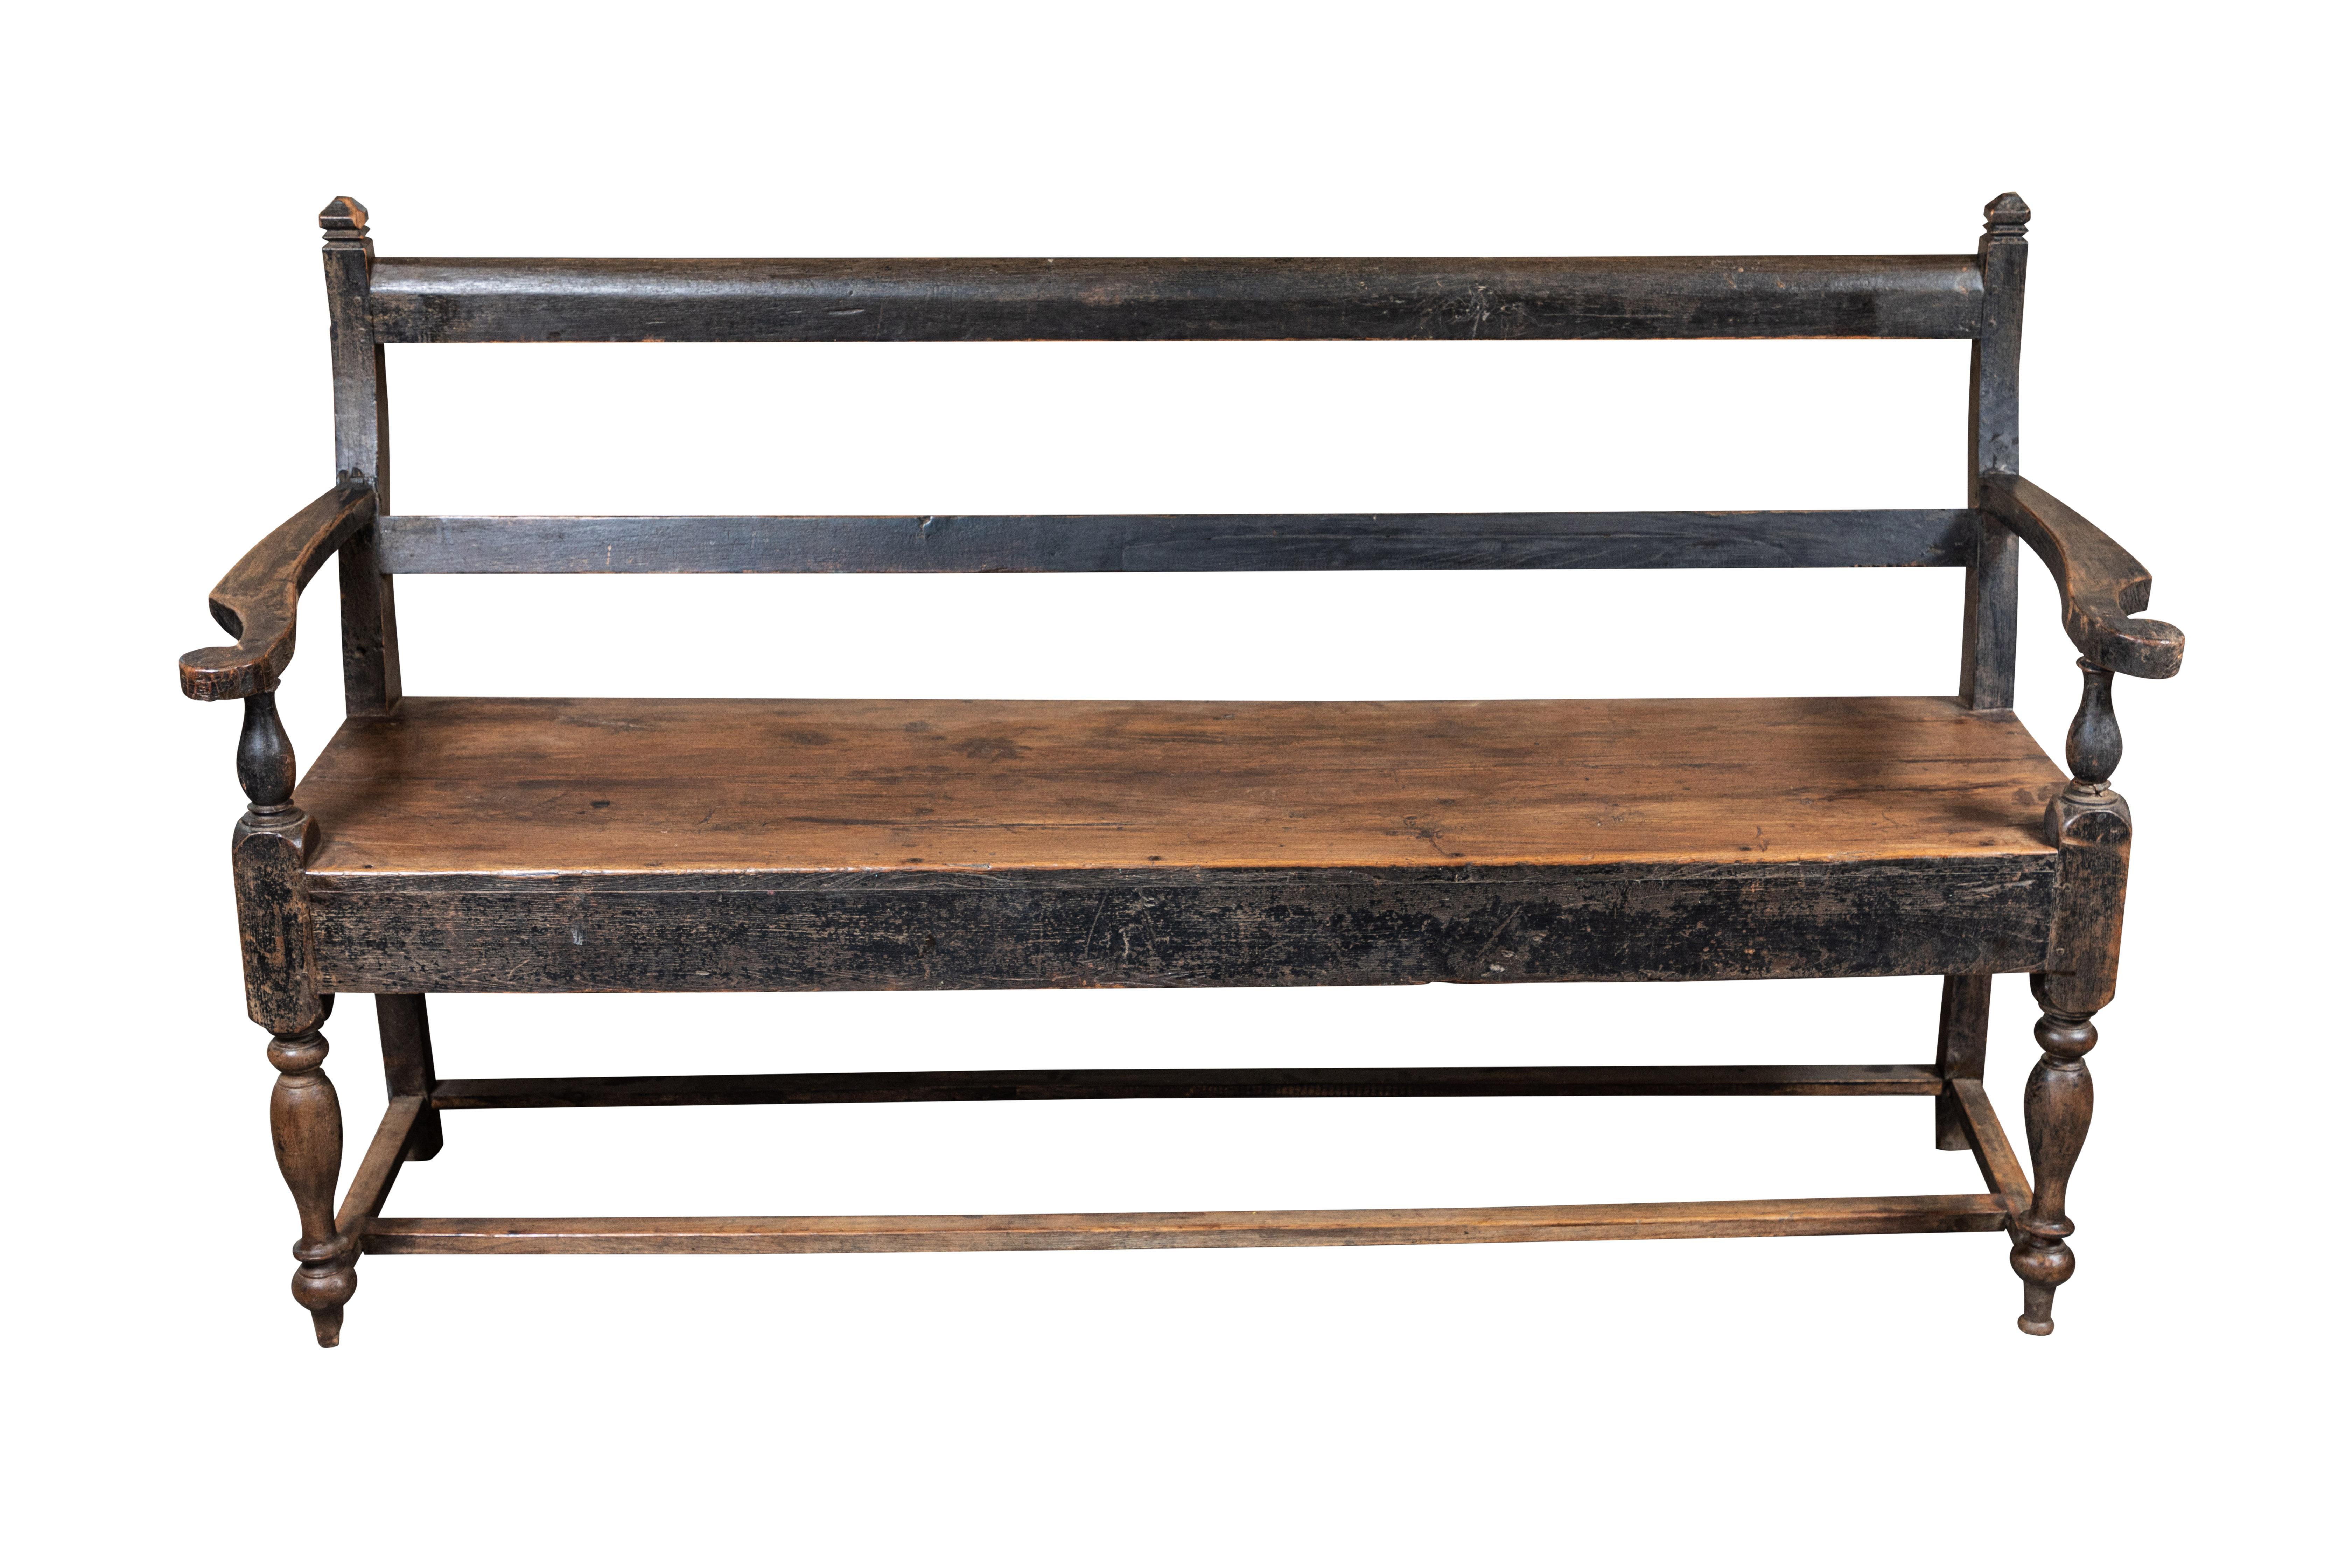 19th century British Colonial teak bench with worn black finish from India.